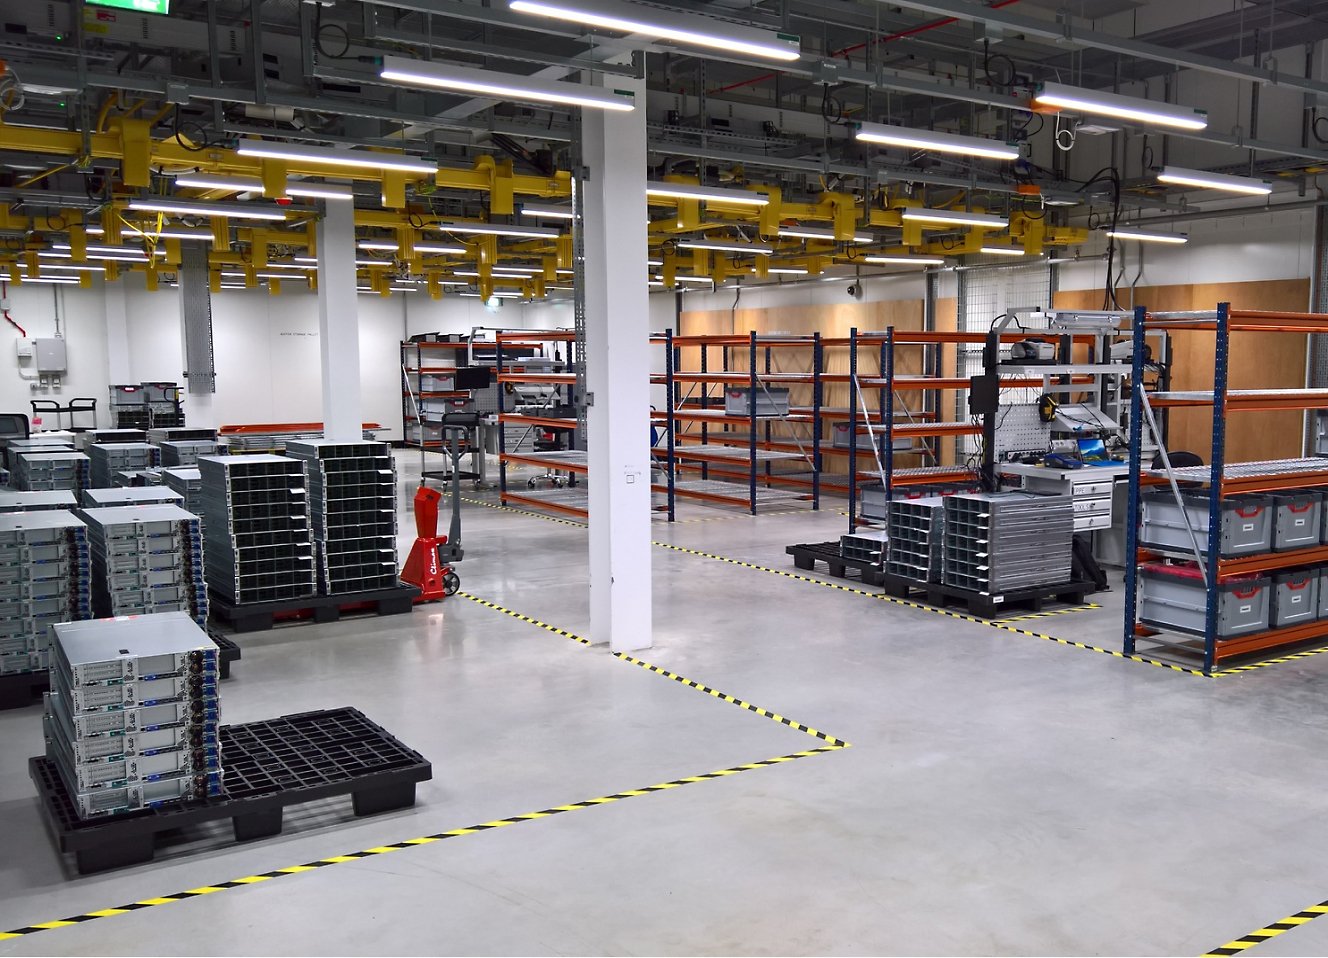 A large warehouse with many racks and shelves.